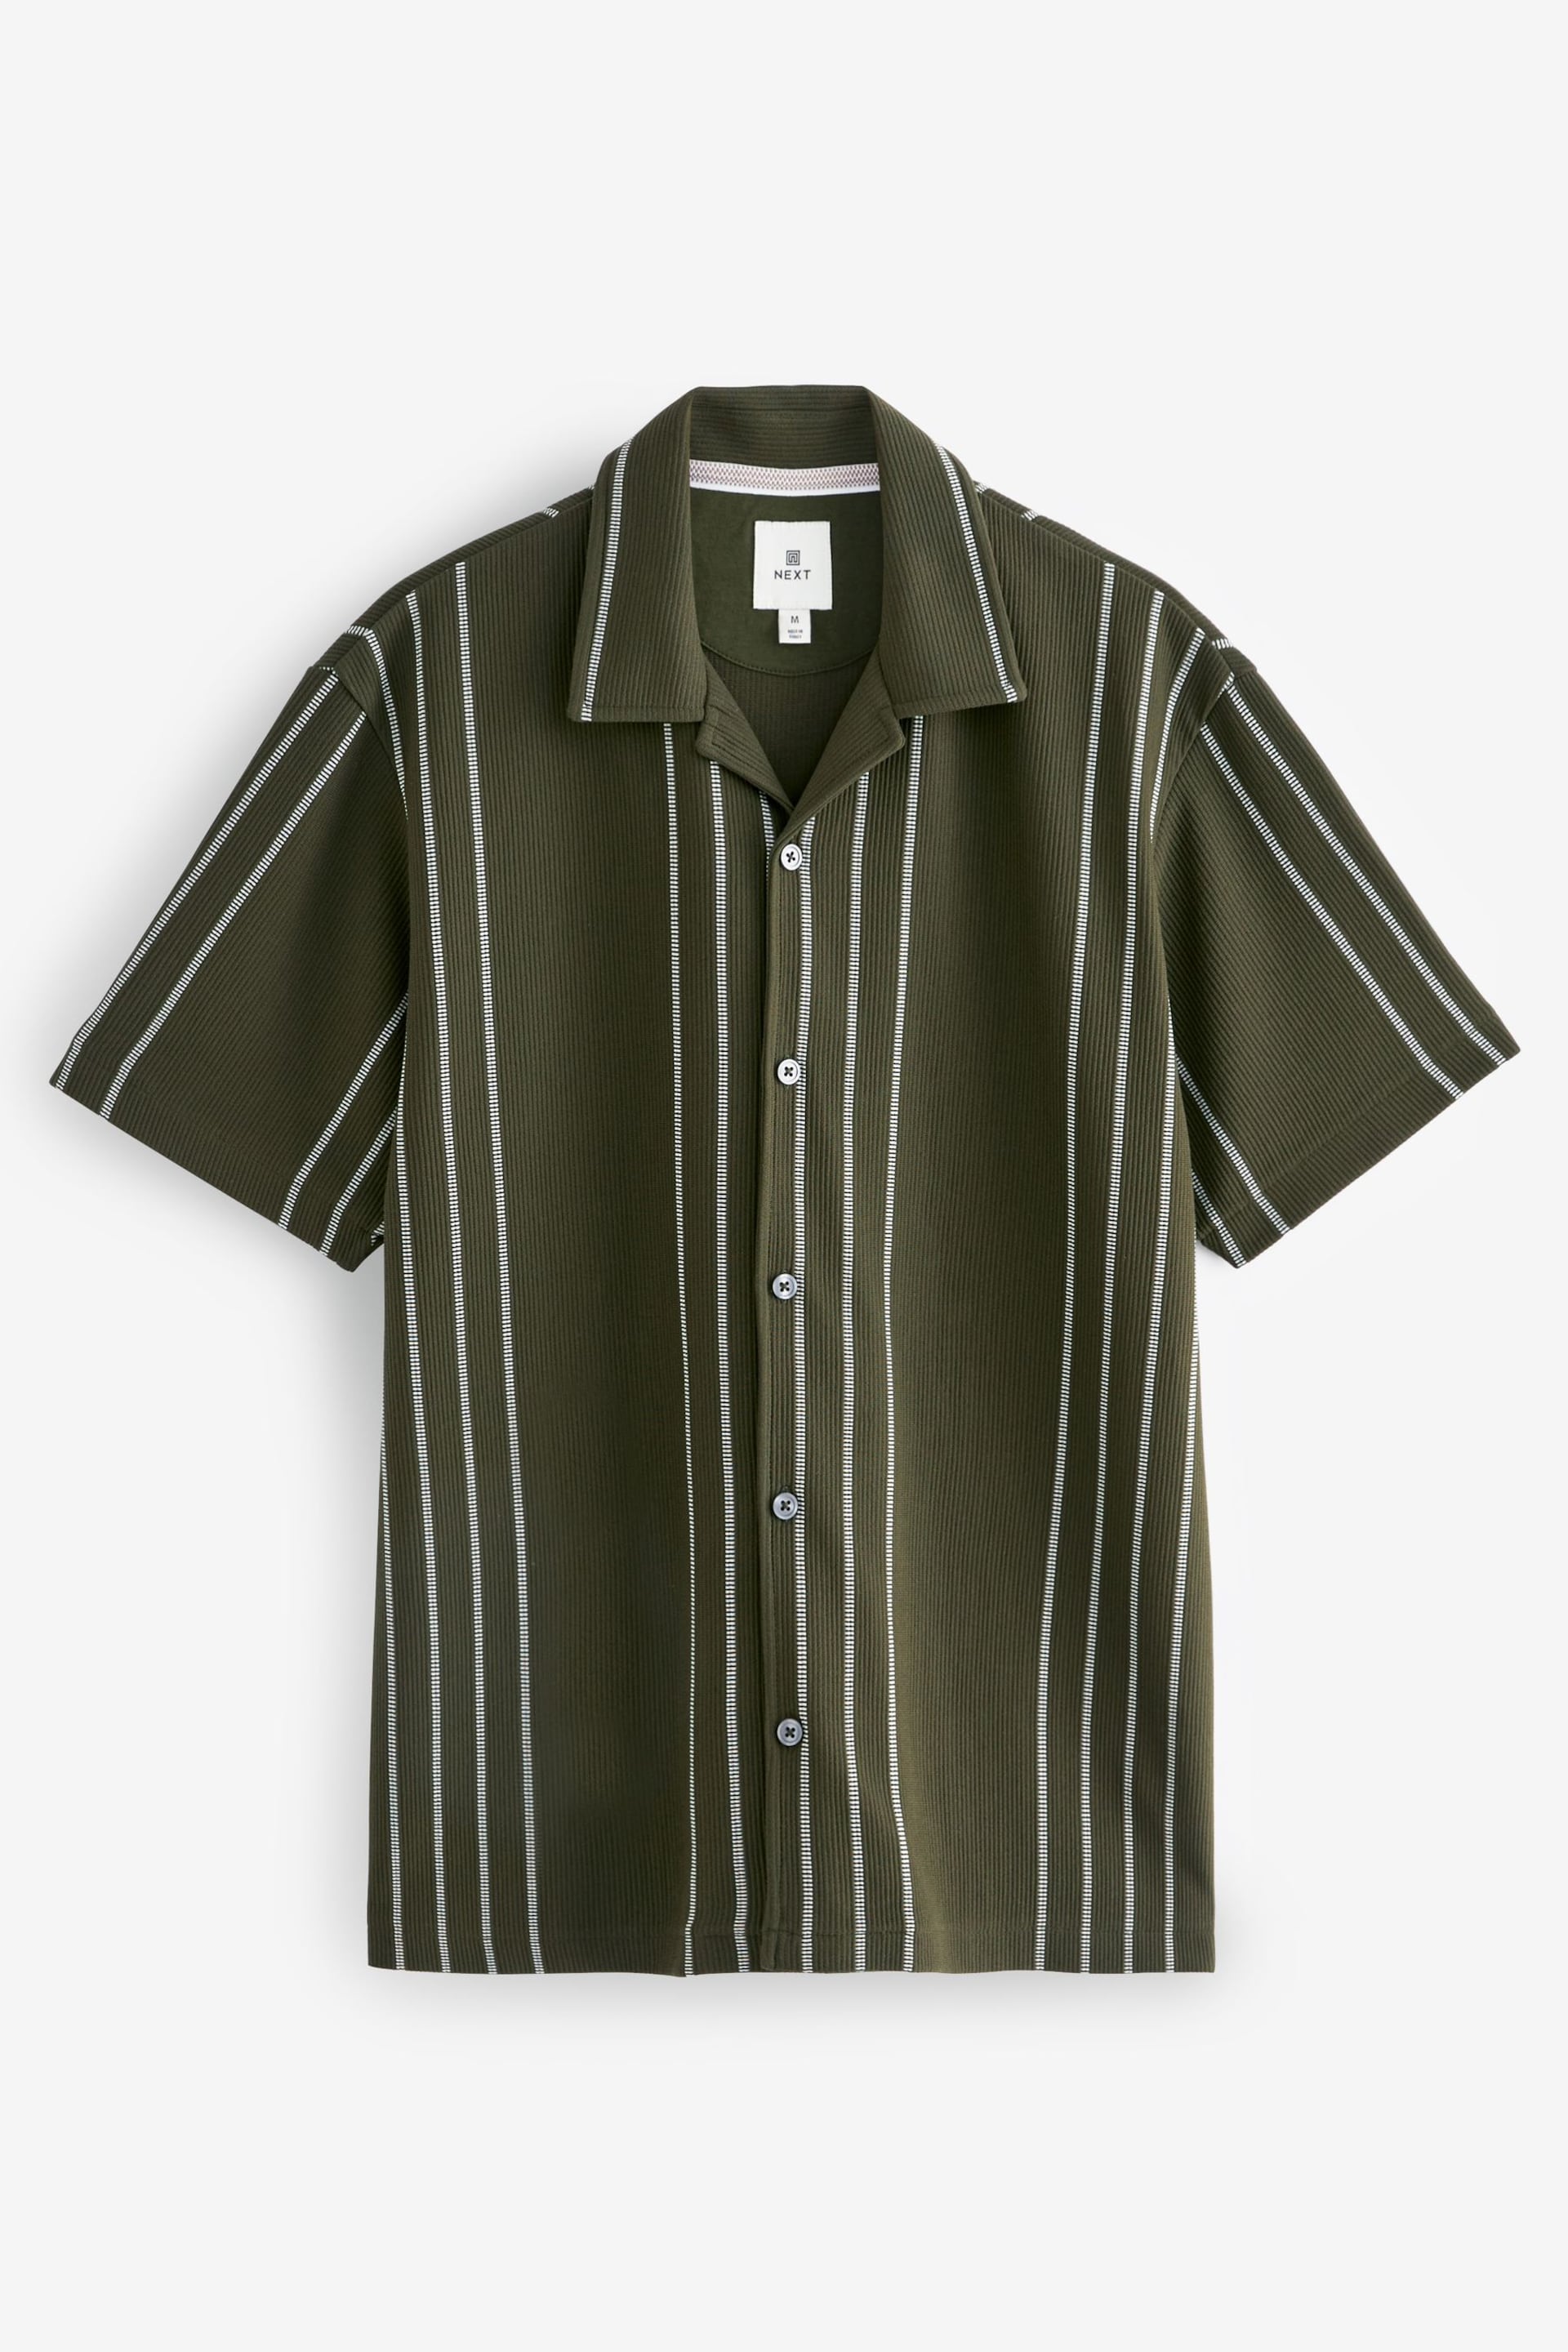 Olive Green Textured Jersey Short Sleeve Shirt - Image 6 of 7